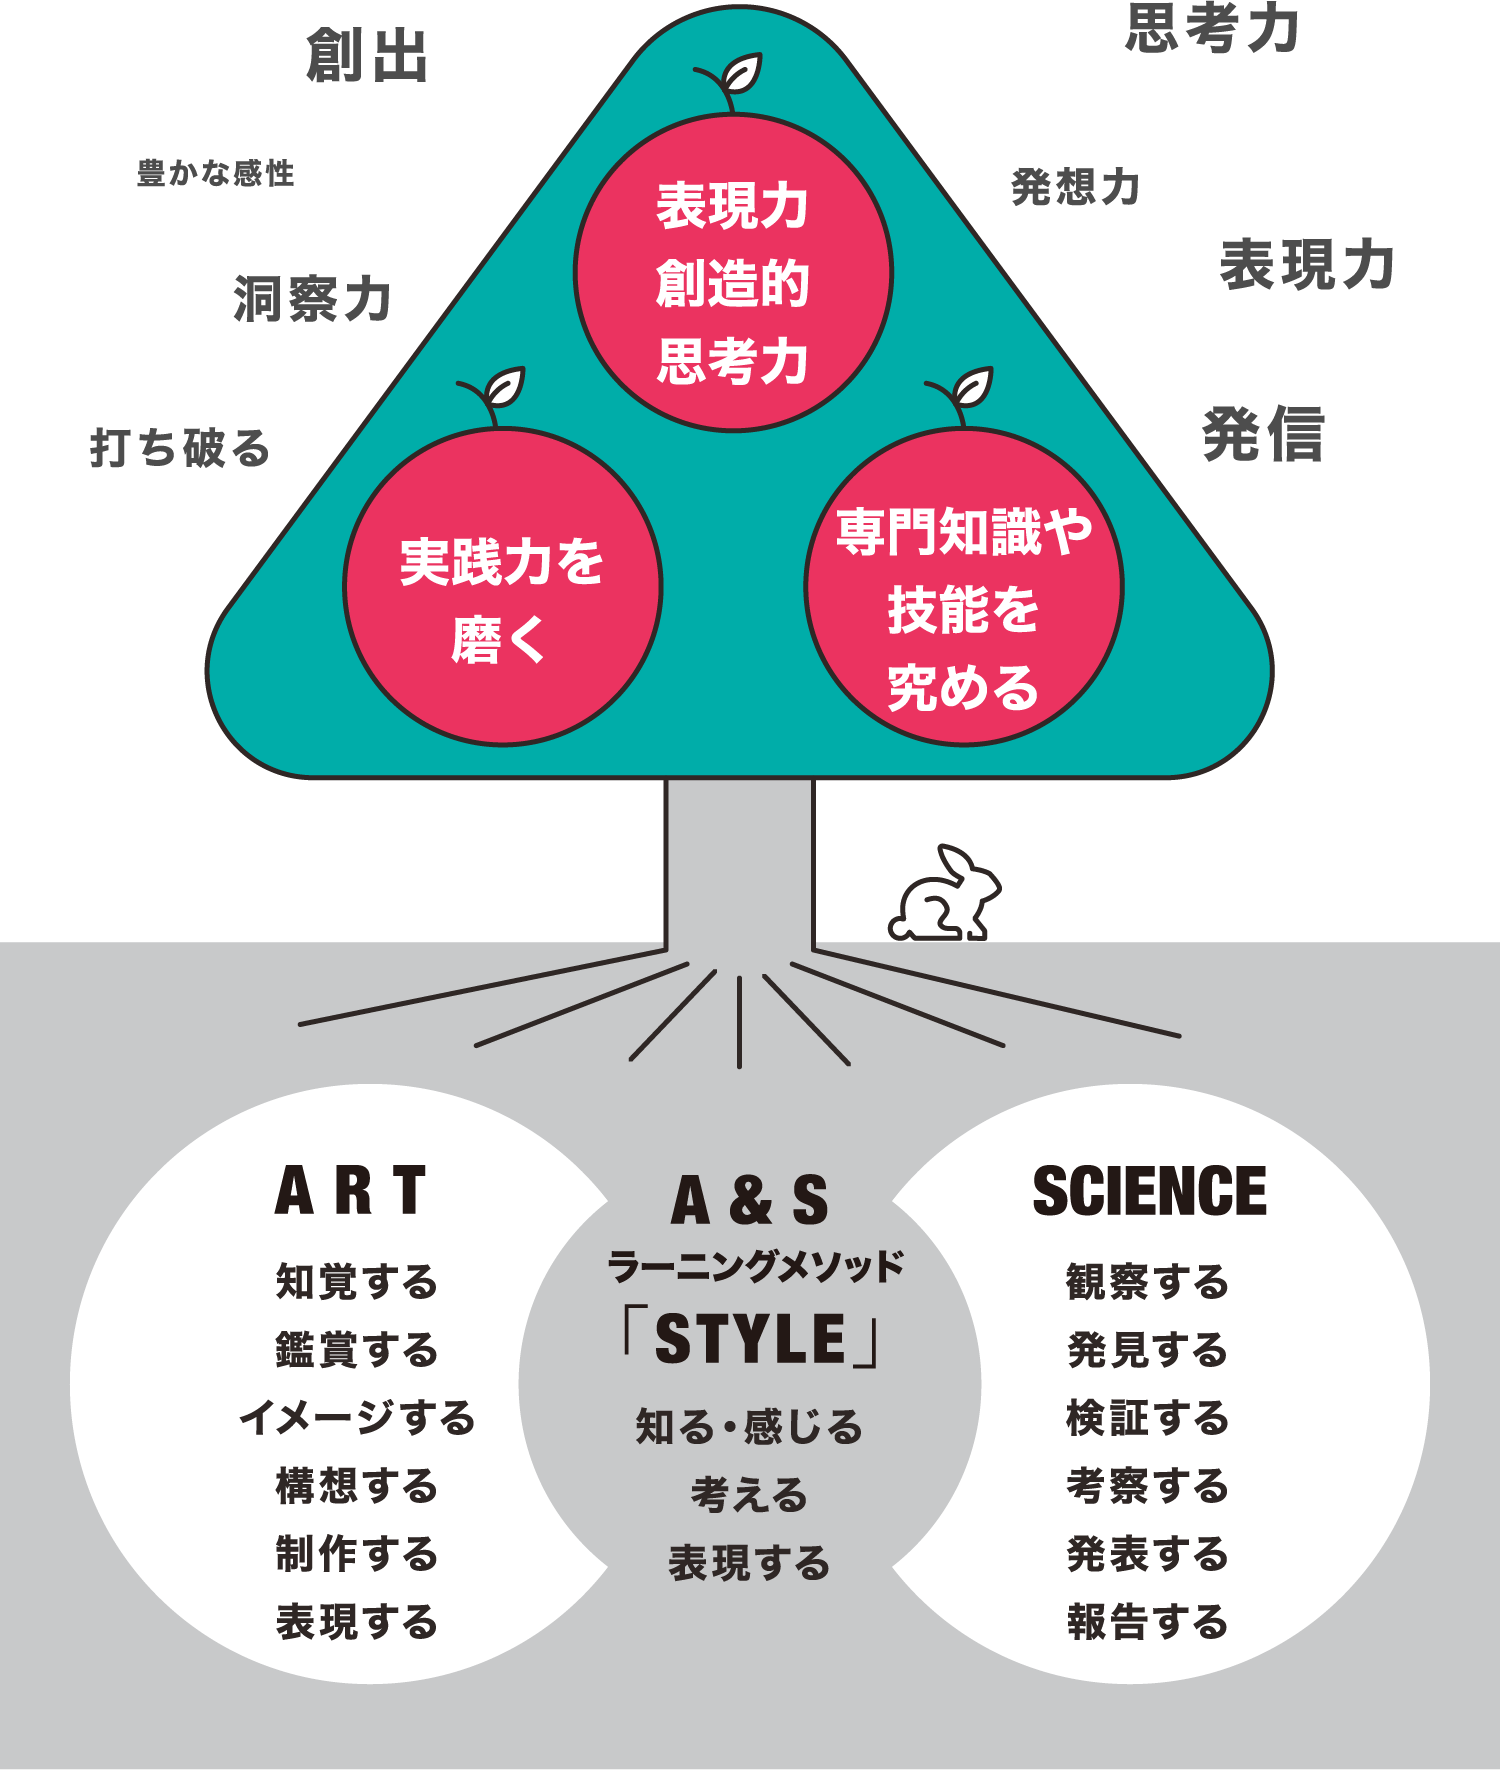 A&S 学修目標